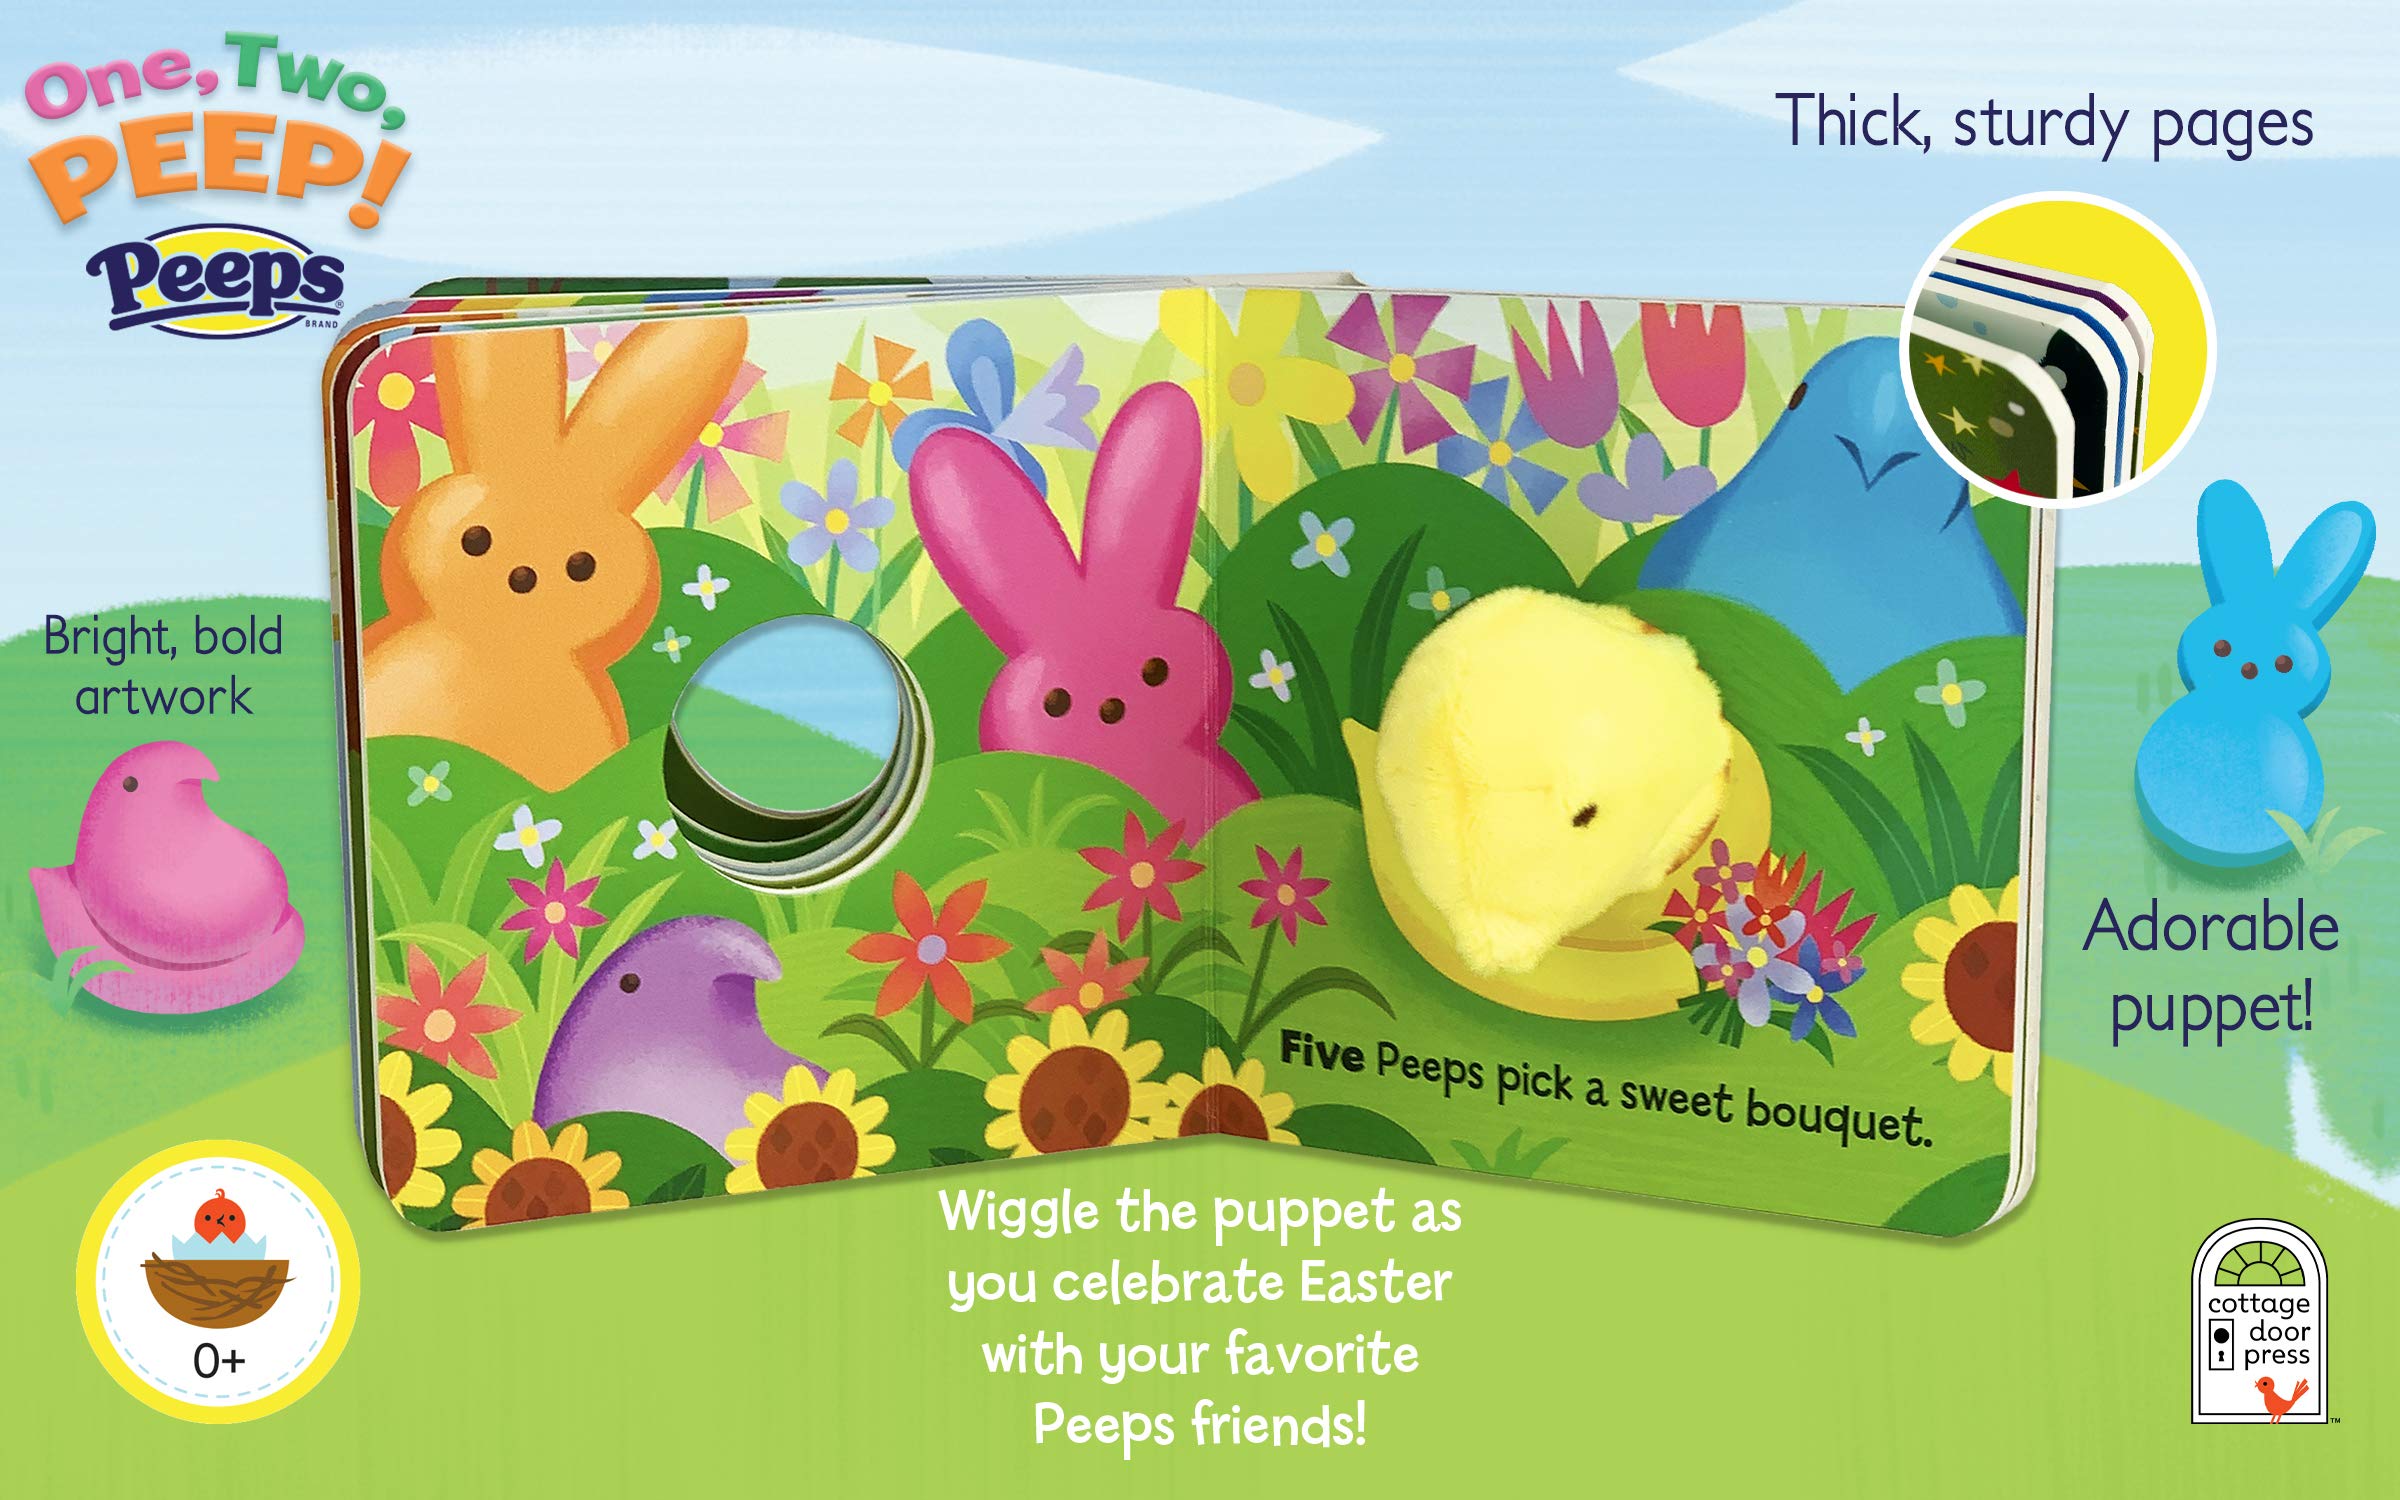 One, Two, Peep! - An Easter Counting Finger Puppet Book    